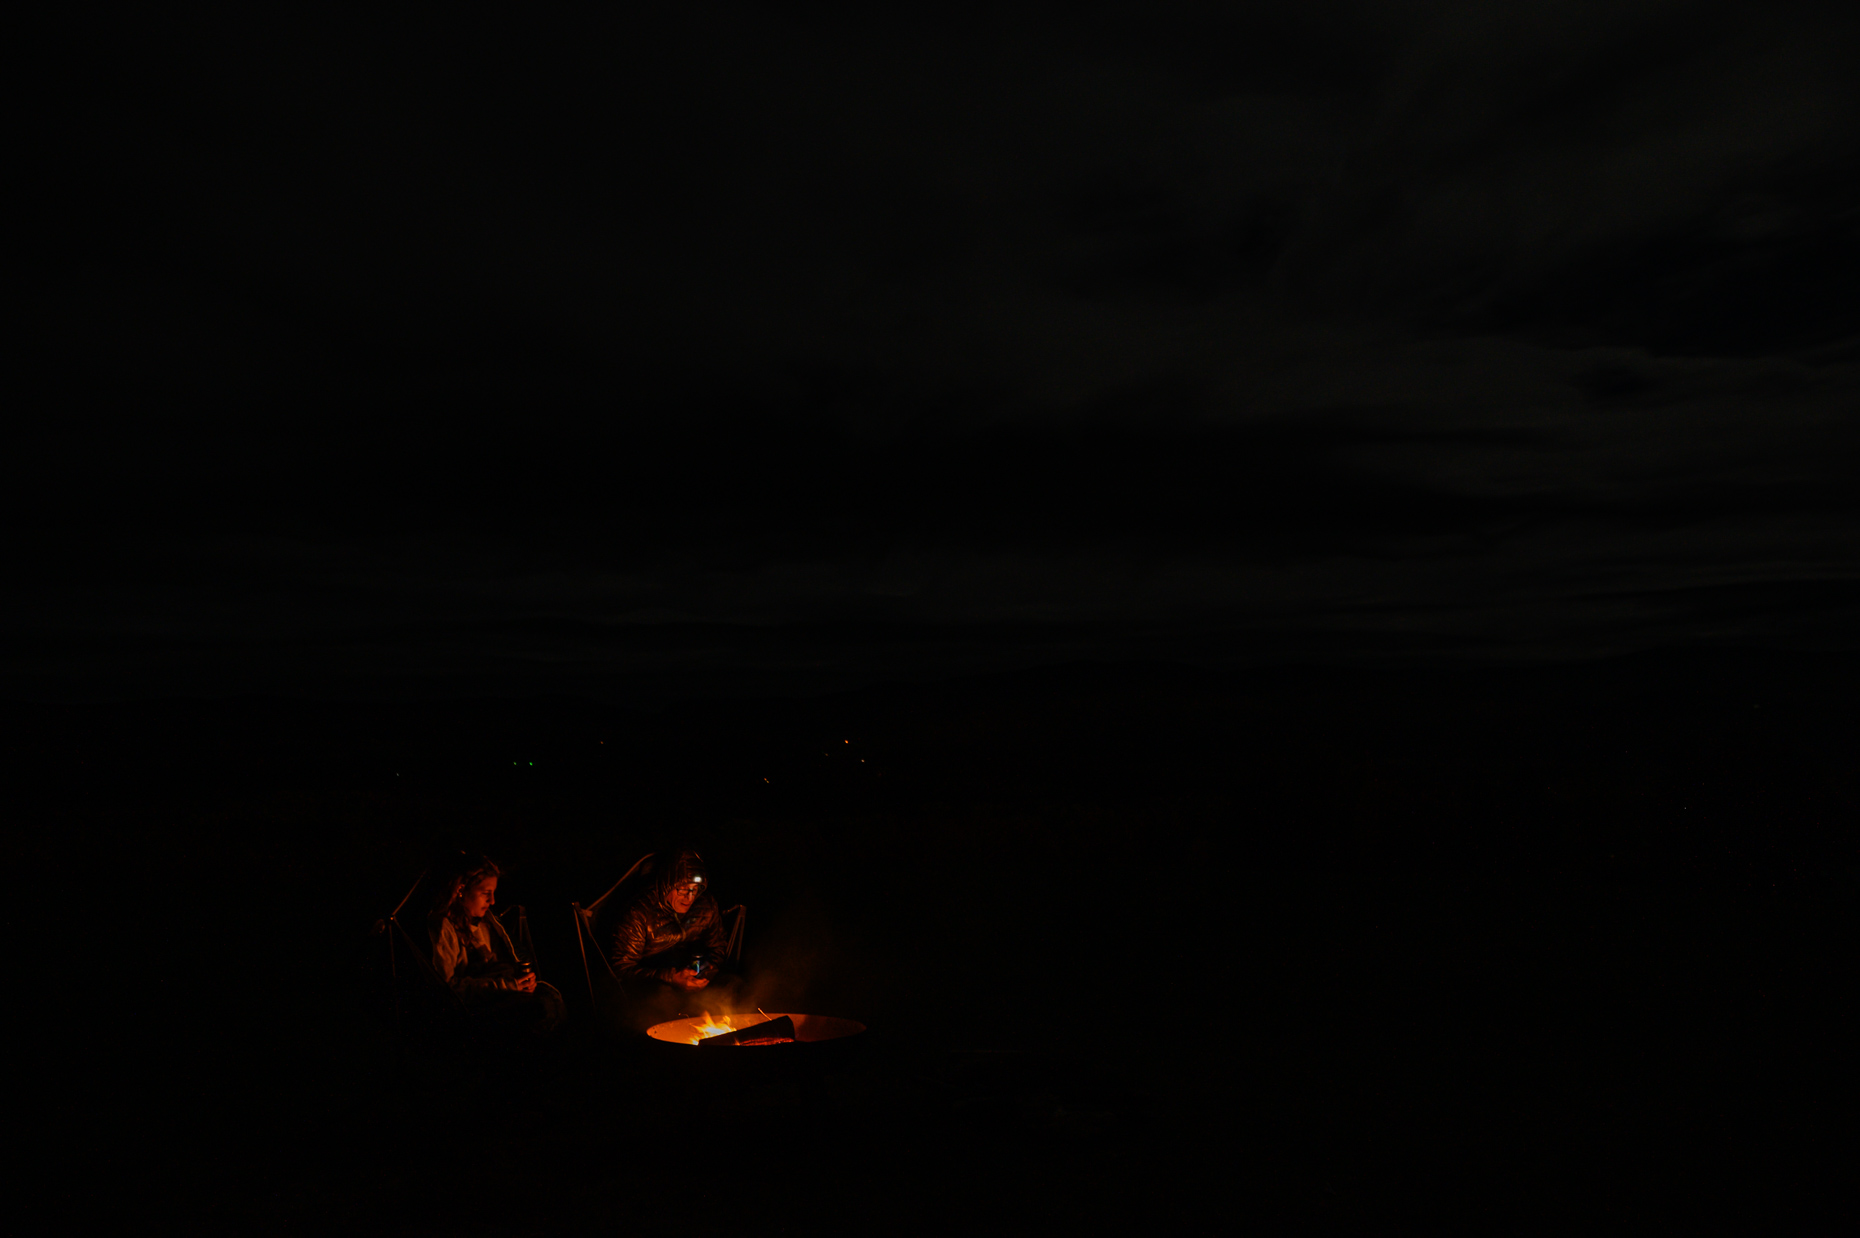 Hanging out by the Campfire